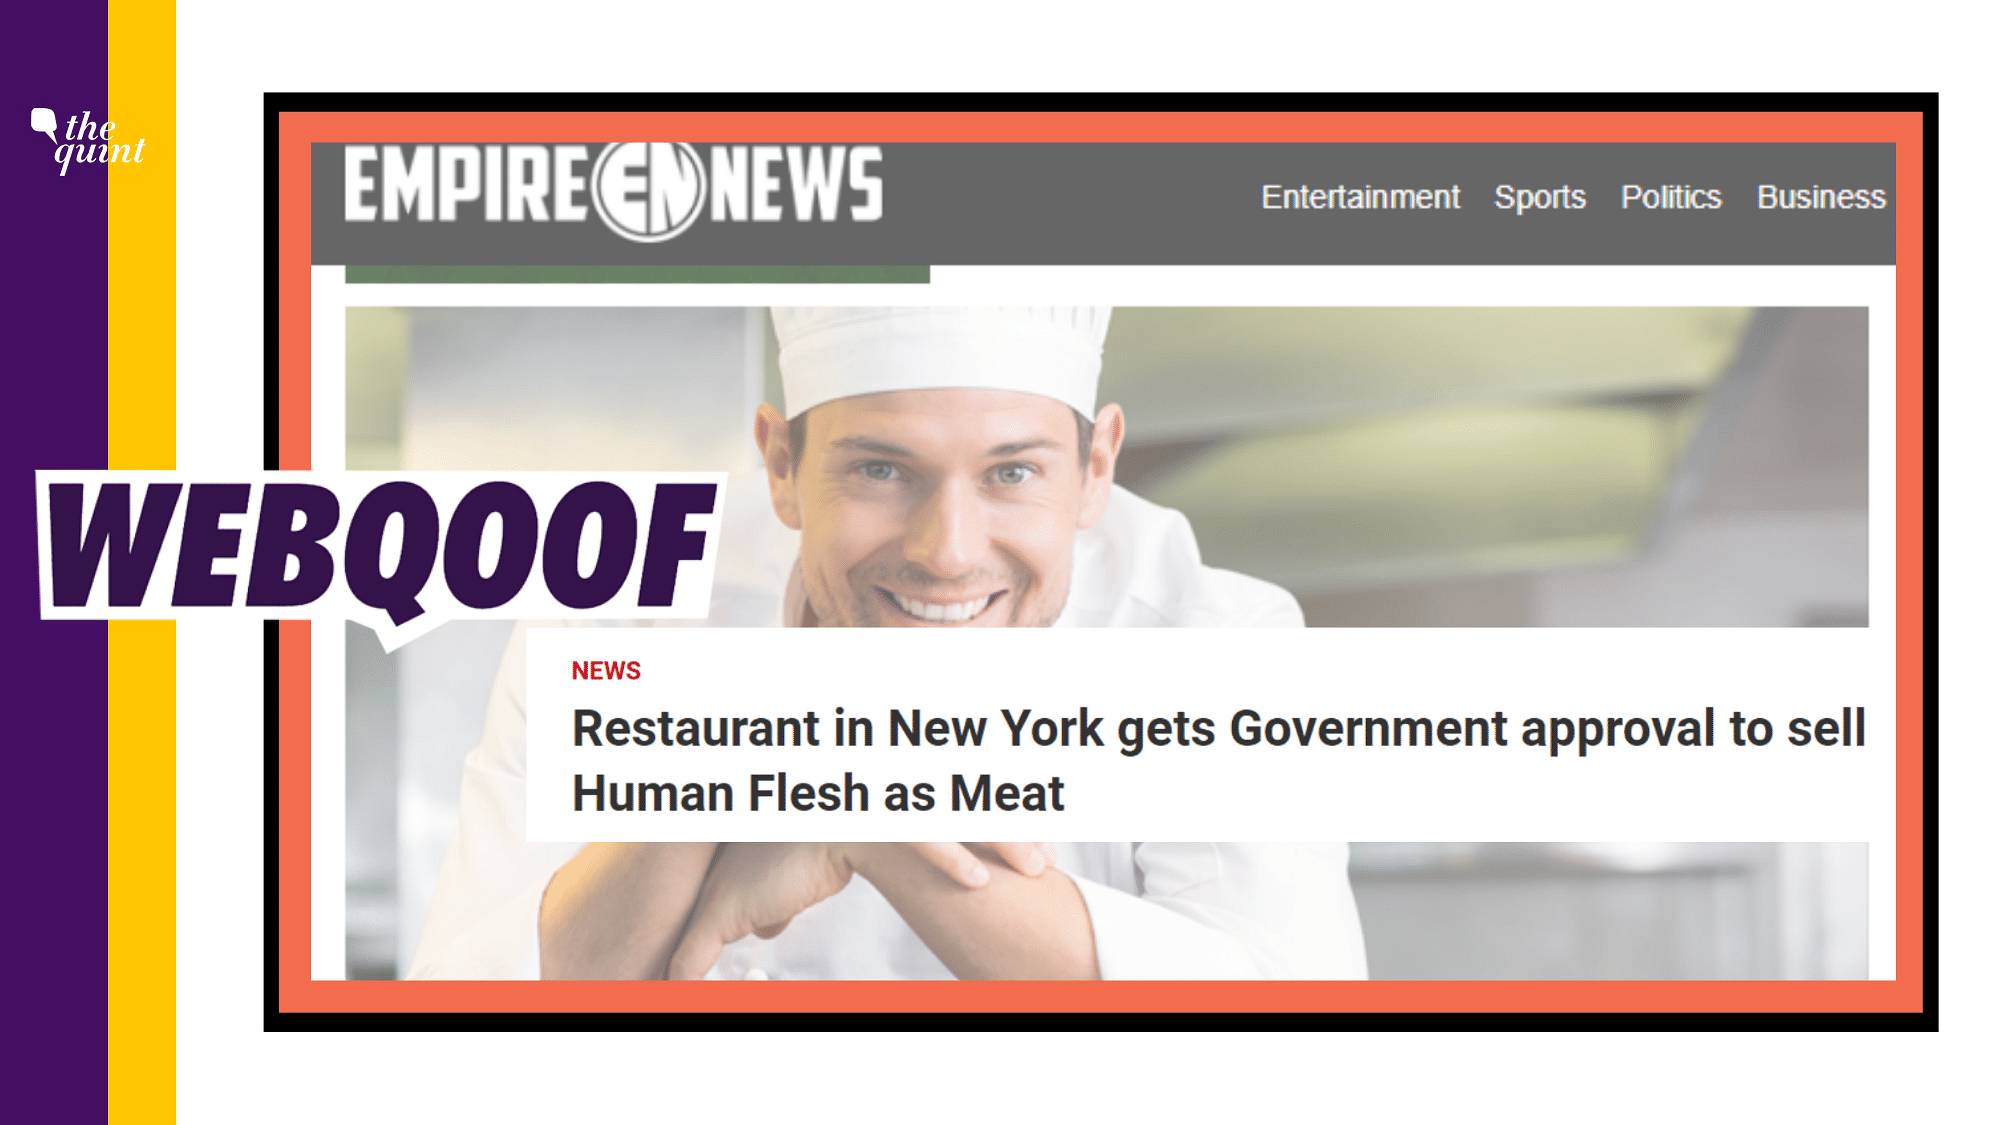 An image of the article that claims that a restaurant in New York gets an approval by the government to sell human flesh.&nbsp;